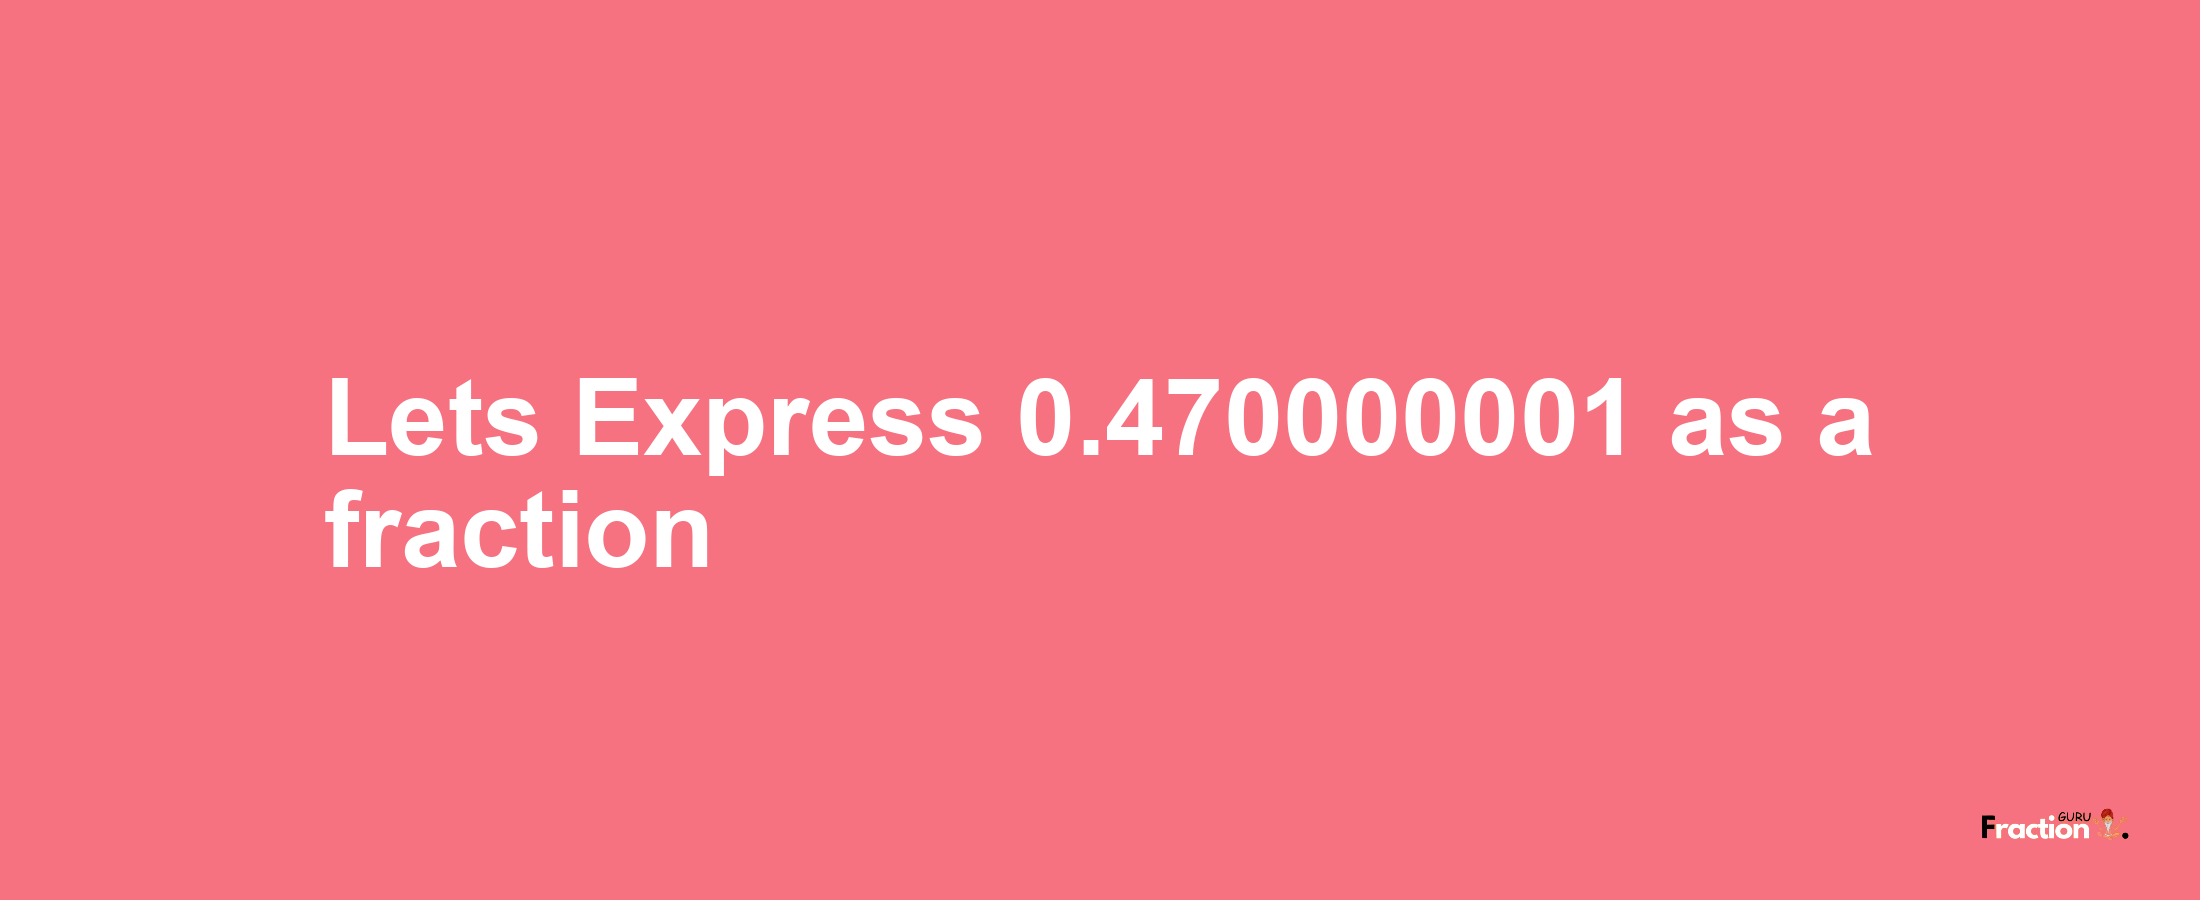 Lets Express 0.470000001 as afraction